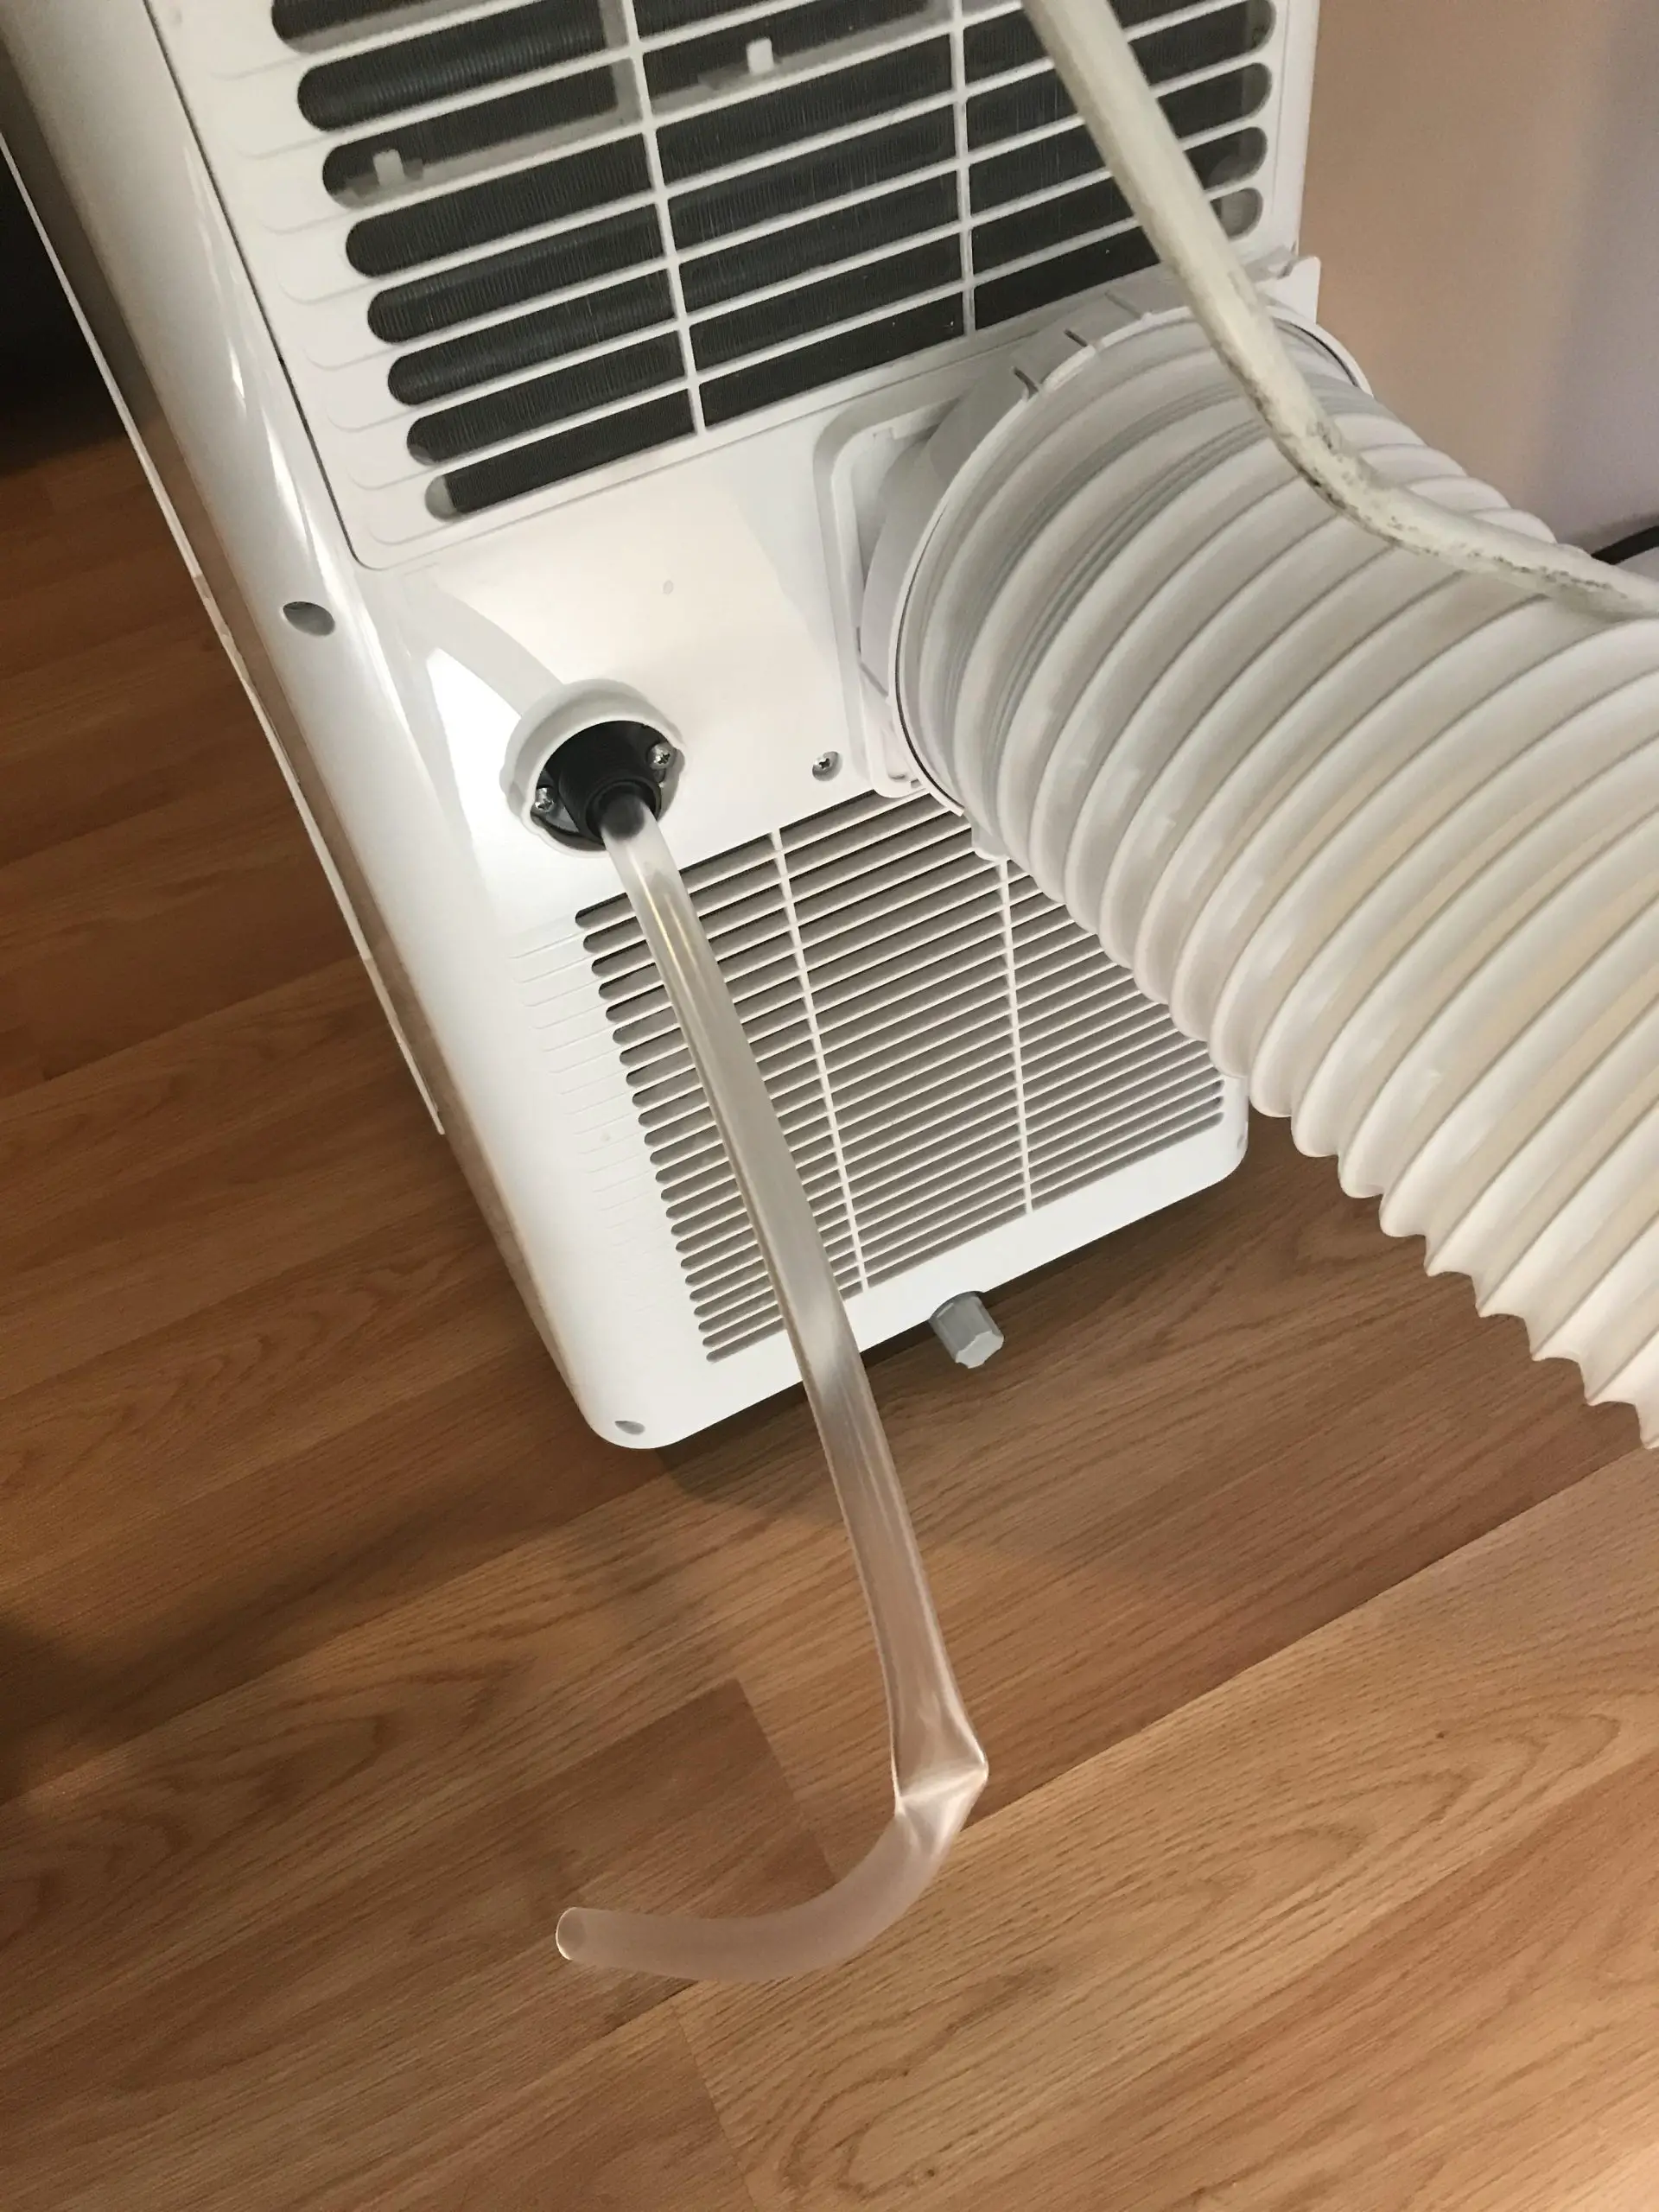 Portable Air Conditioner Leaking Water from Bottom